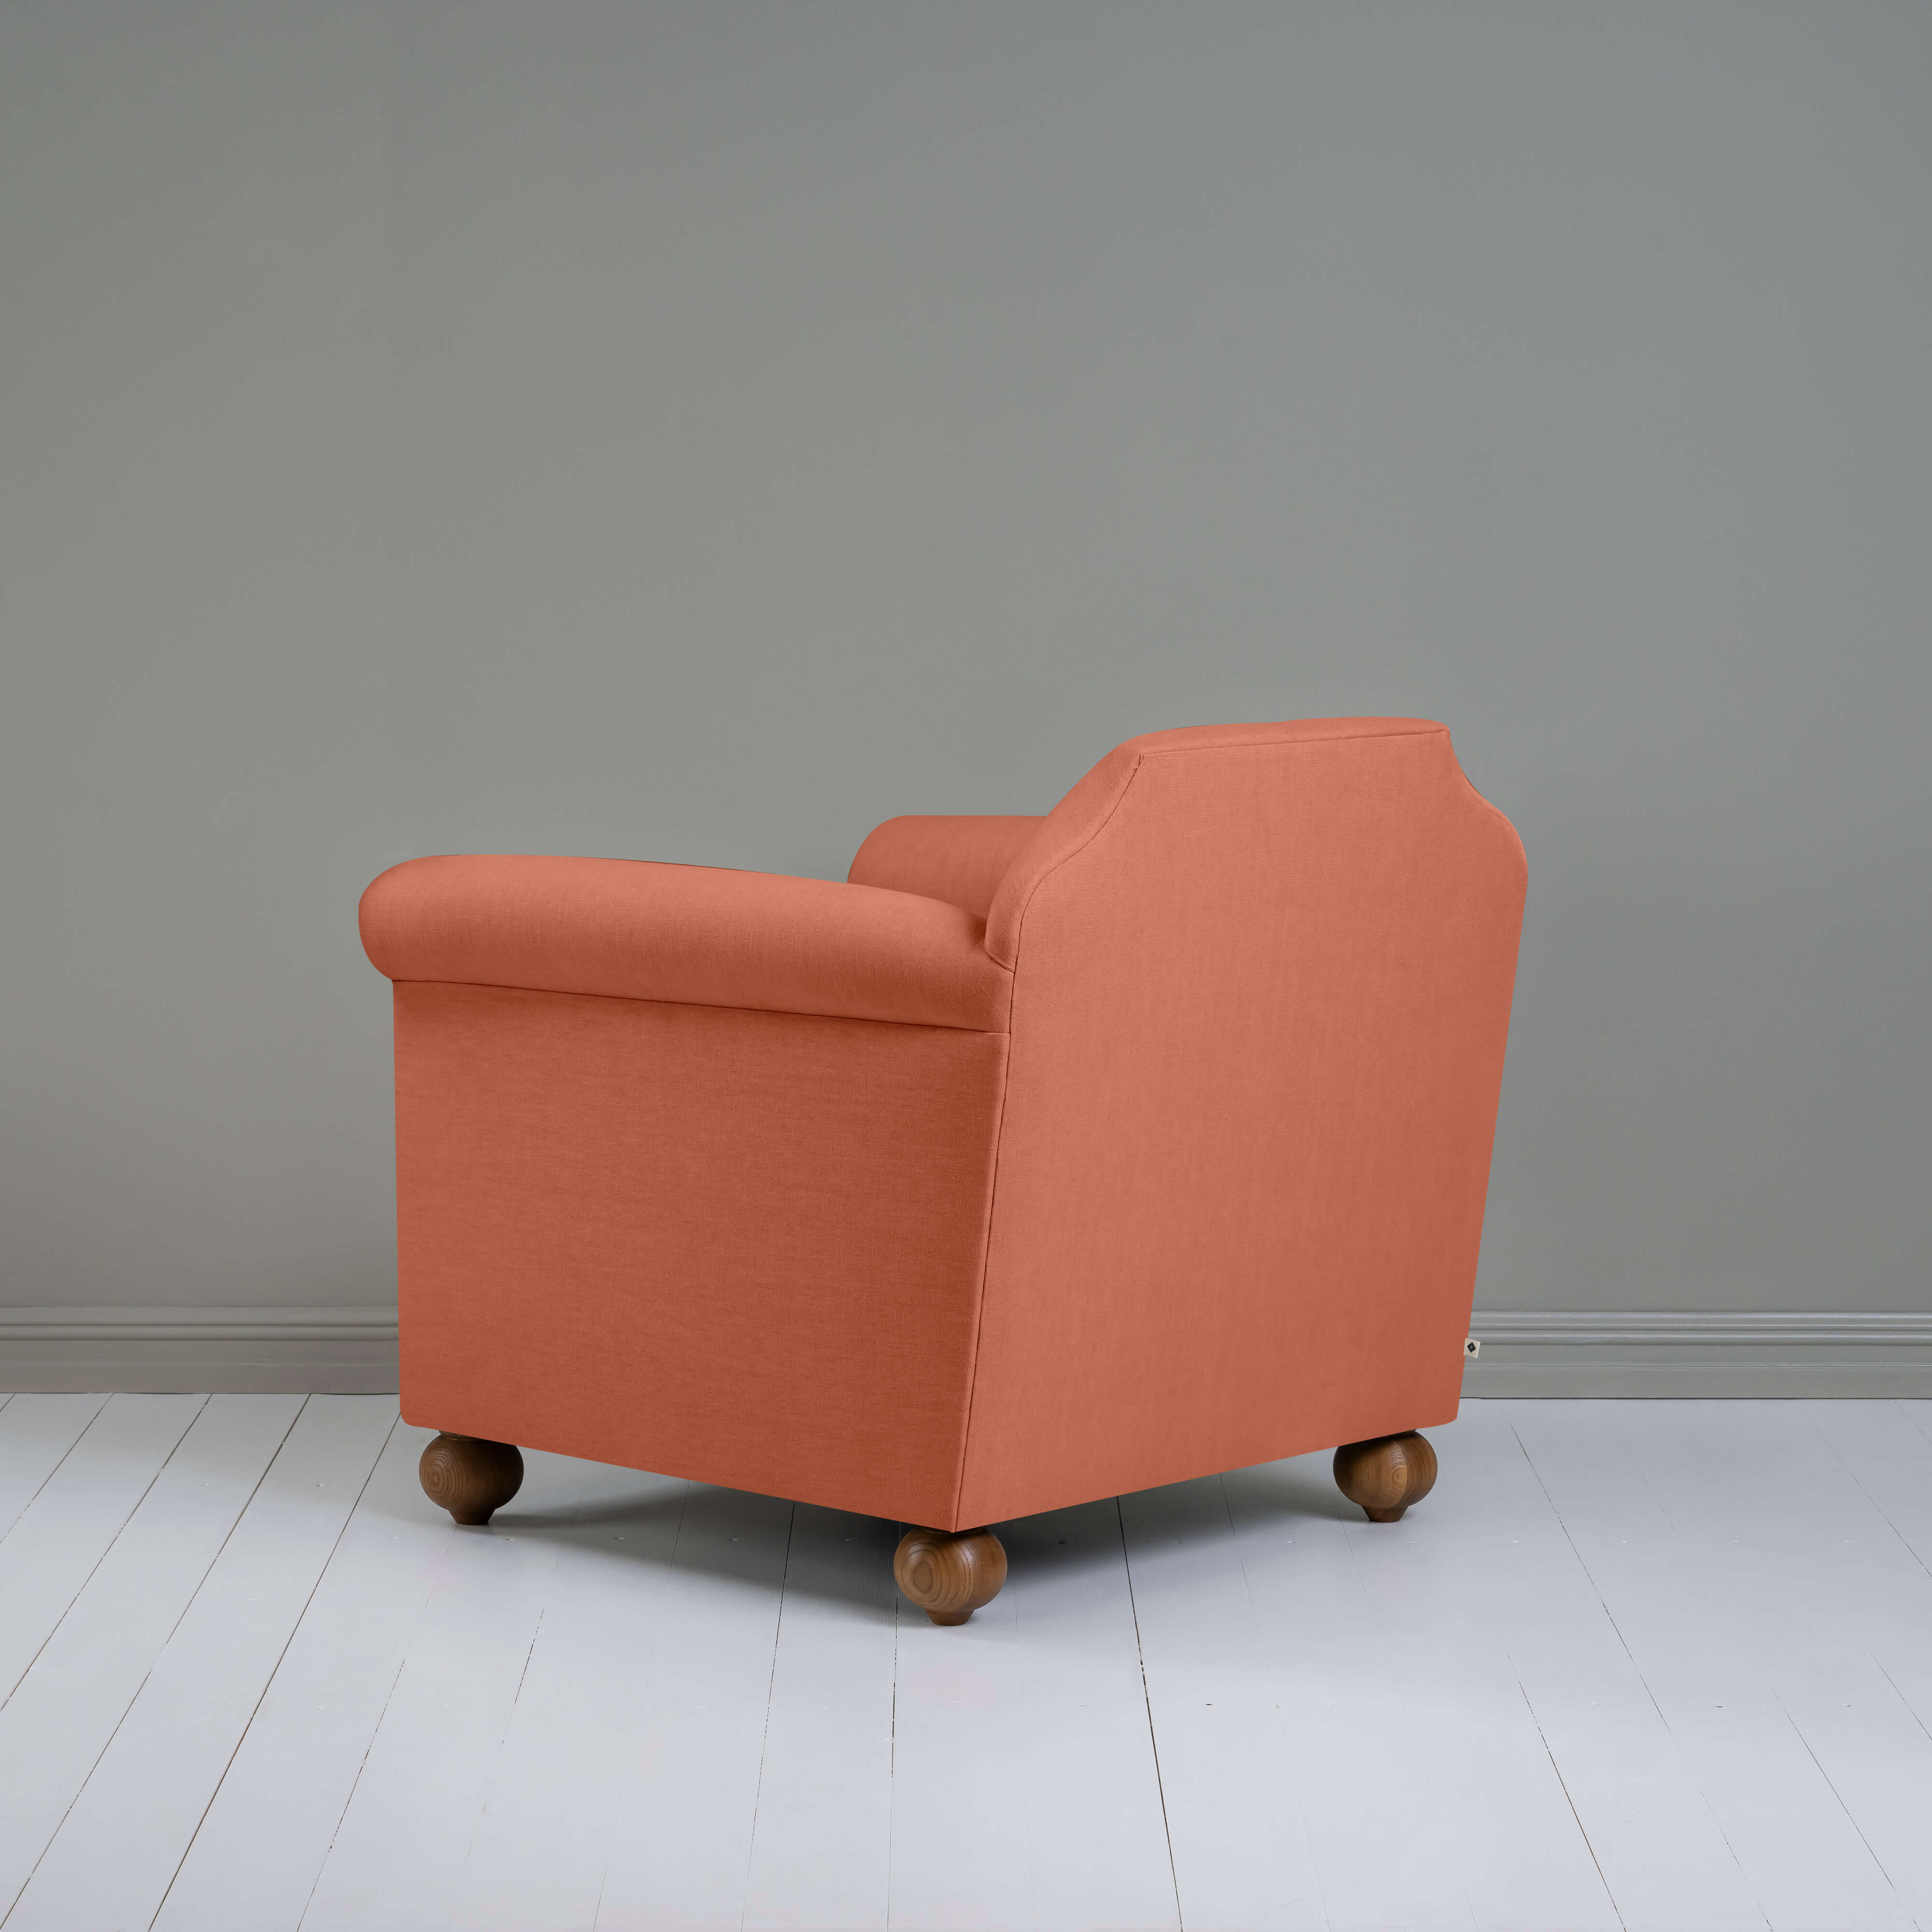  Dolittle Armchair in Laidback Linen Cayenne 